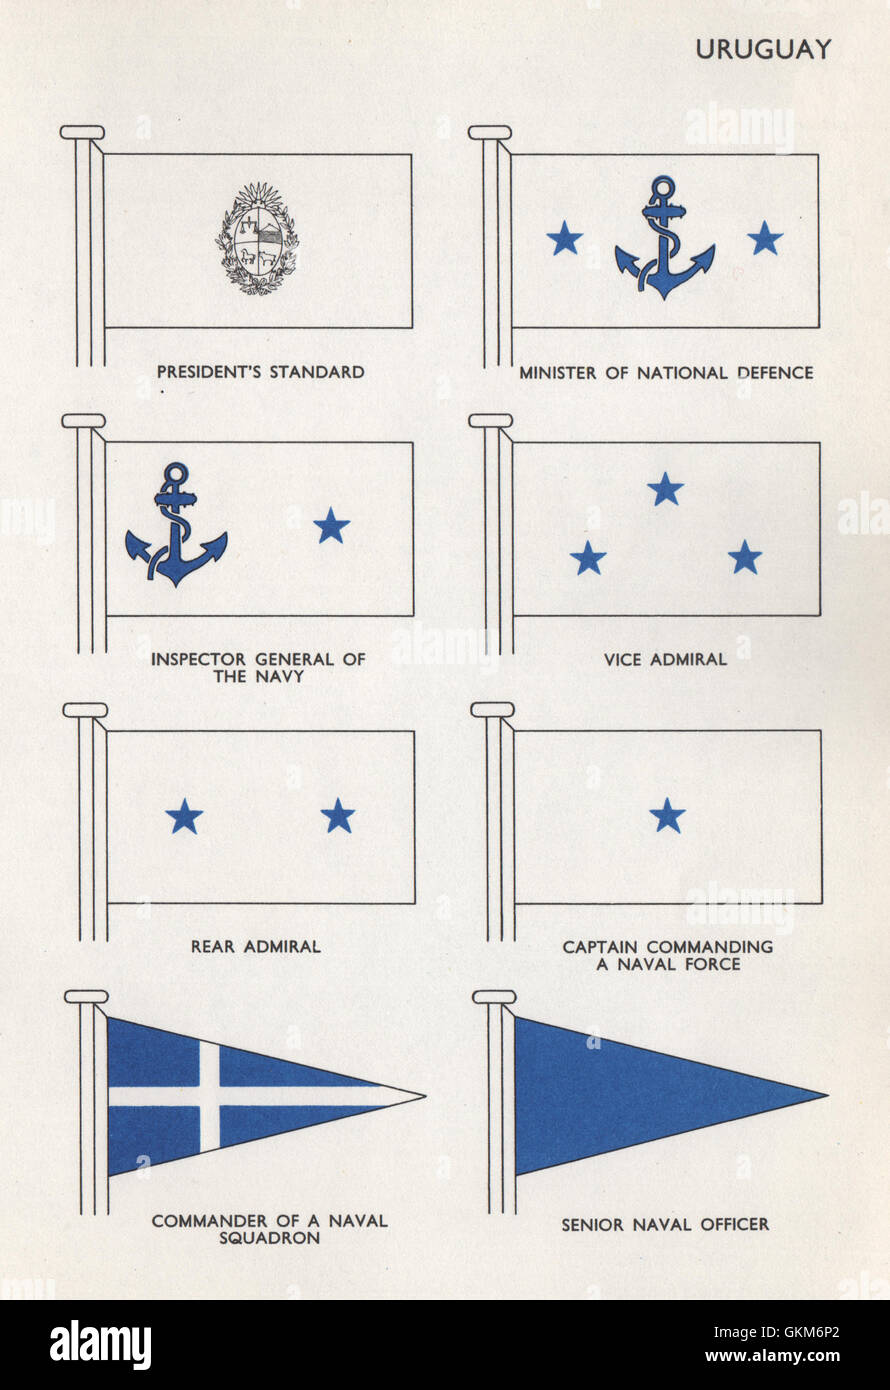 URUGUAY FLAGS. President's Standard. Minister of National Defence. Admiral, 1958 Stock Photo